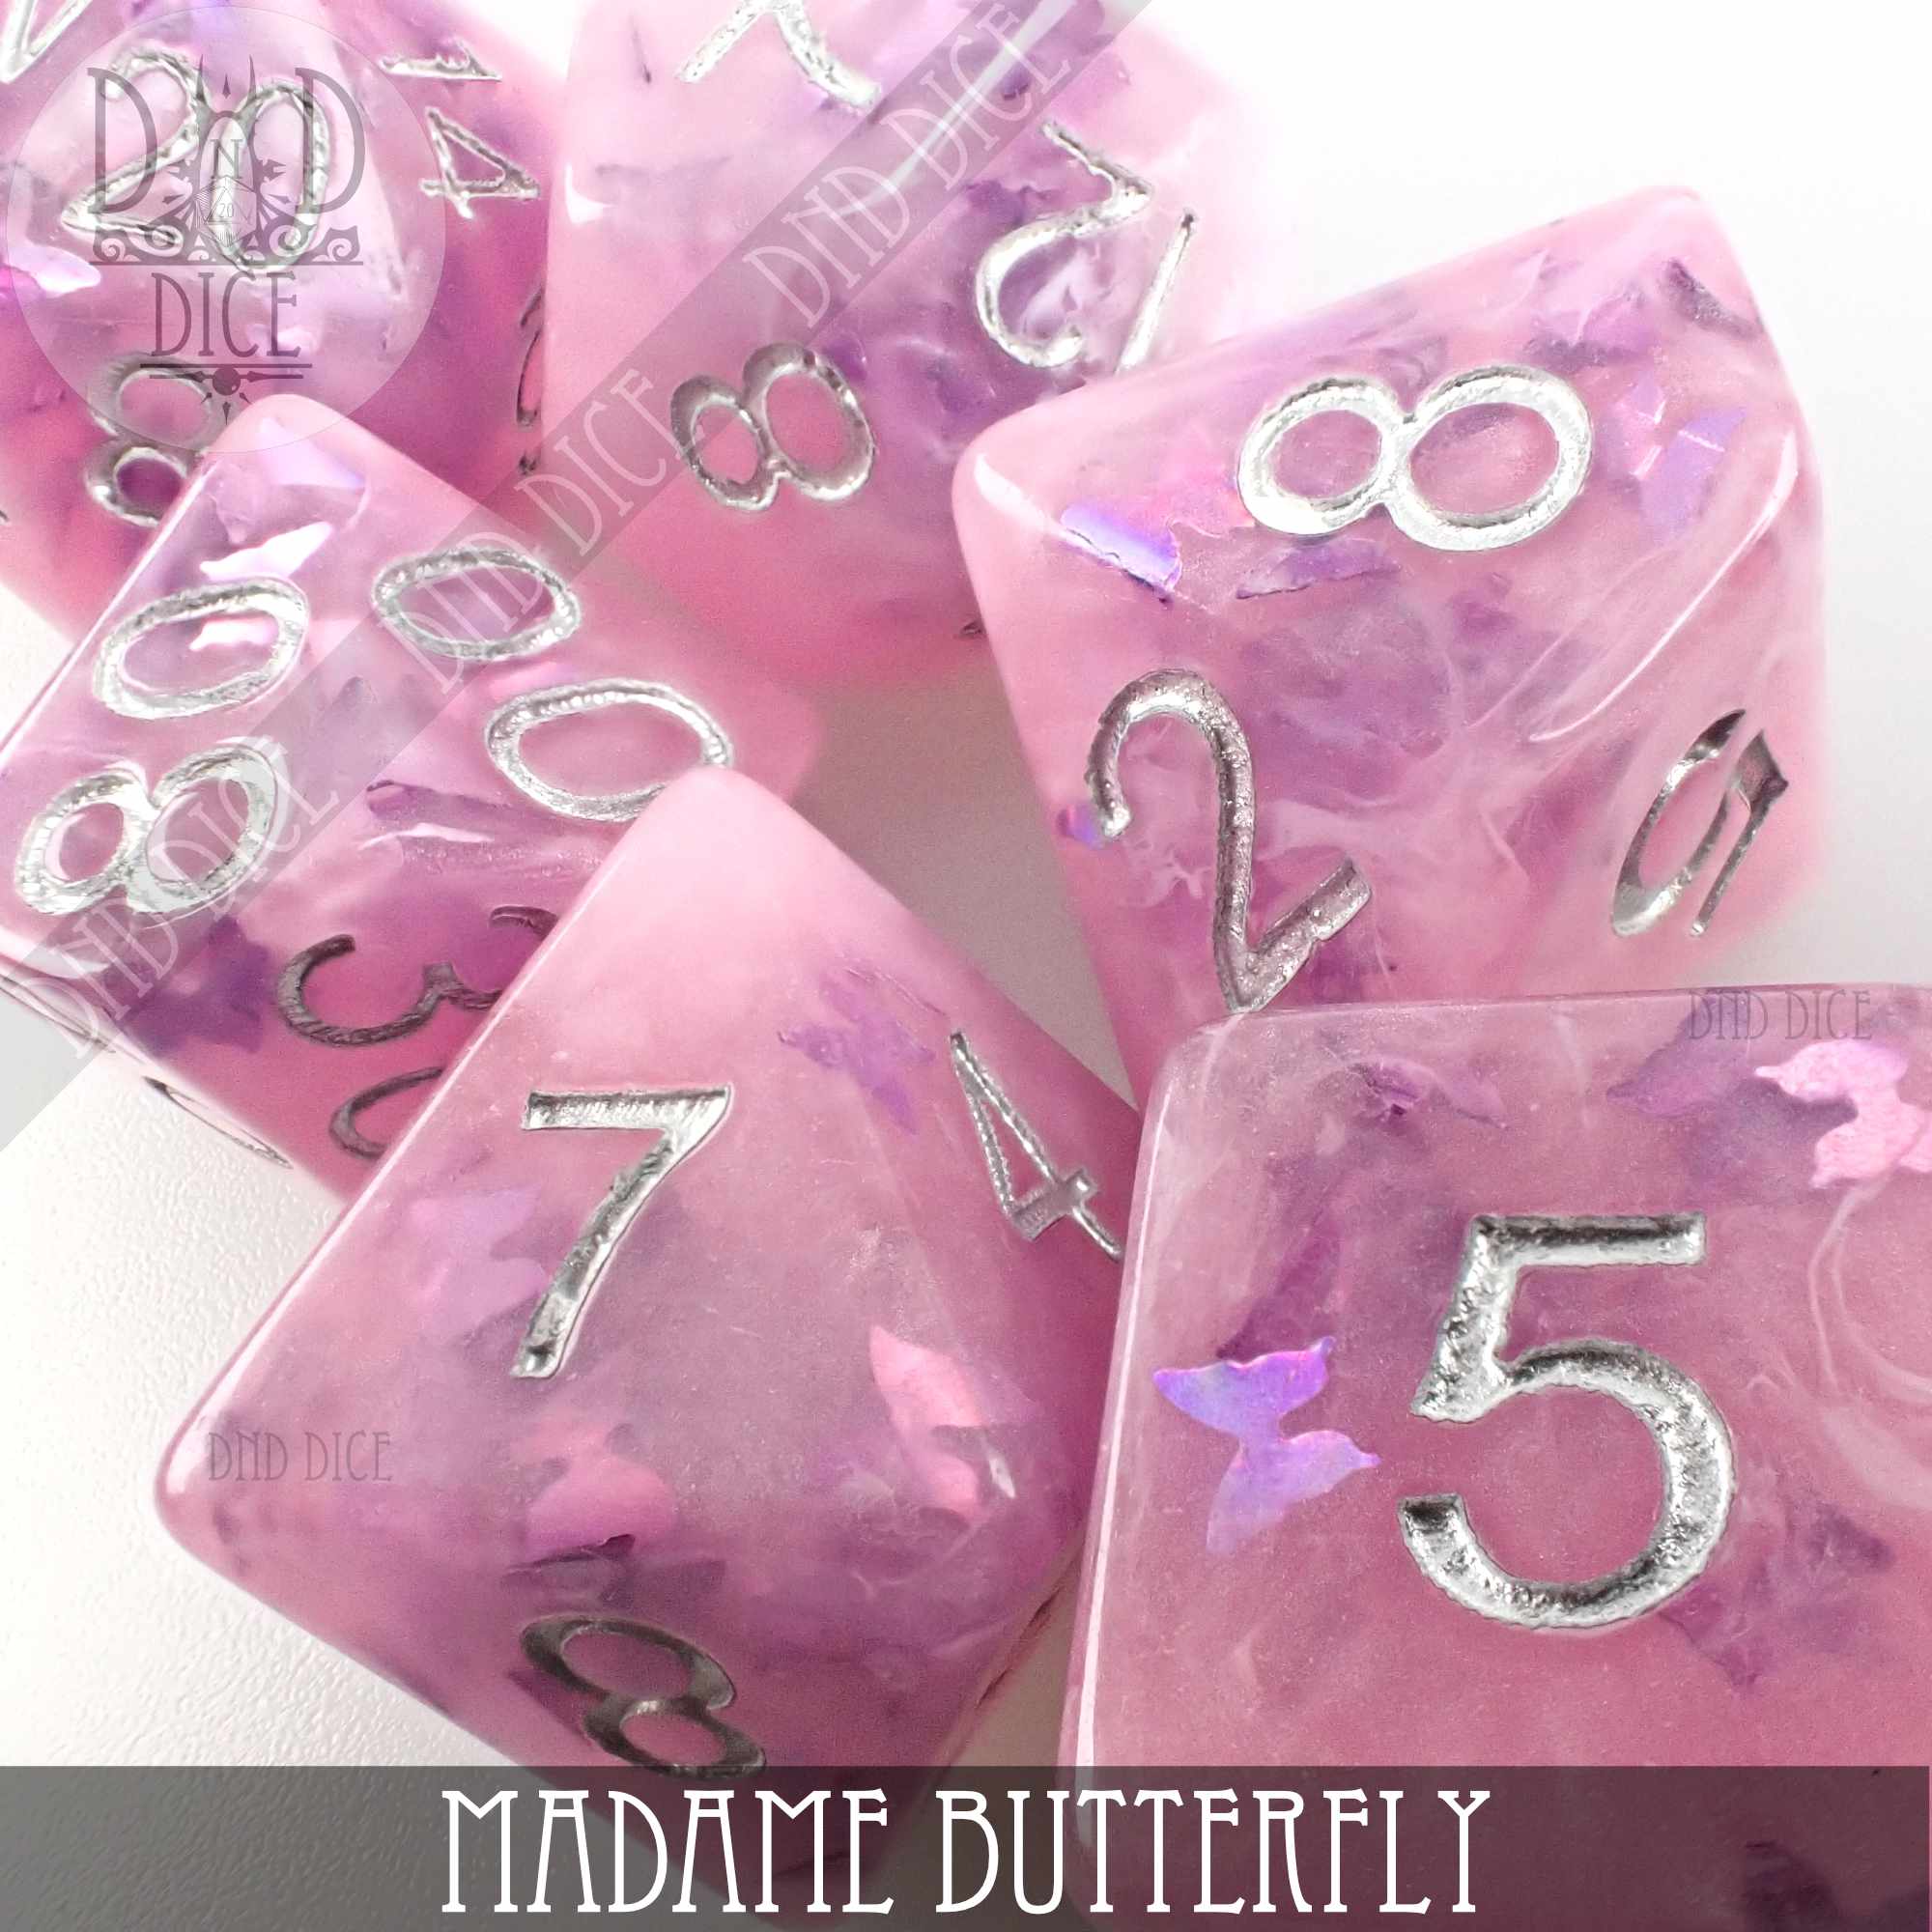 Madame Butterfly Dice Set